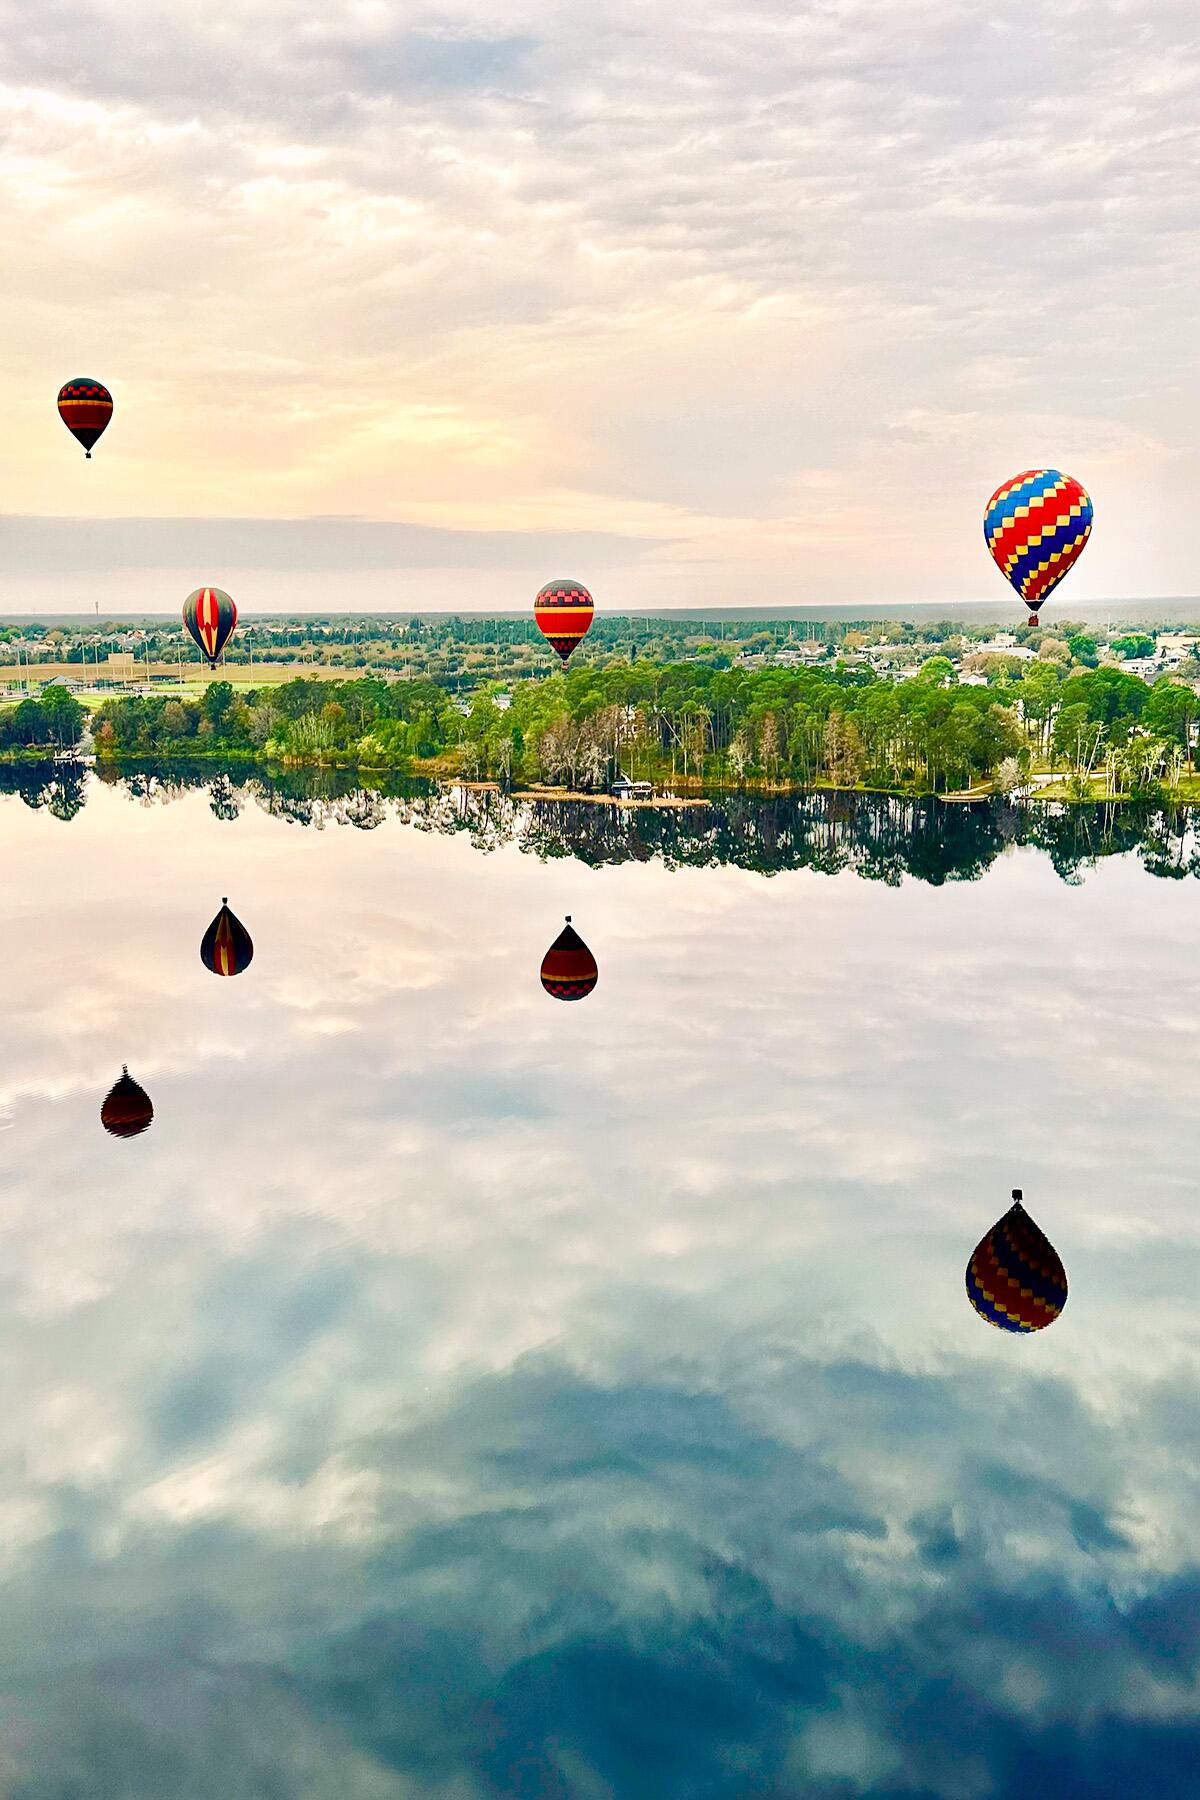 <a href='https://www.fodors.com/world/north-america/usa/florida/orlando/experiences/news/photos/best-outdoor-adventures-to-have-around-orlando-florida#'>From &quot;10 Amazing Outdoor Adventures You Can Have in Orlando: Take to the Skies in a Hot Air Balloon&quot;</a>